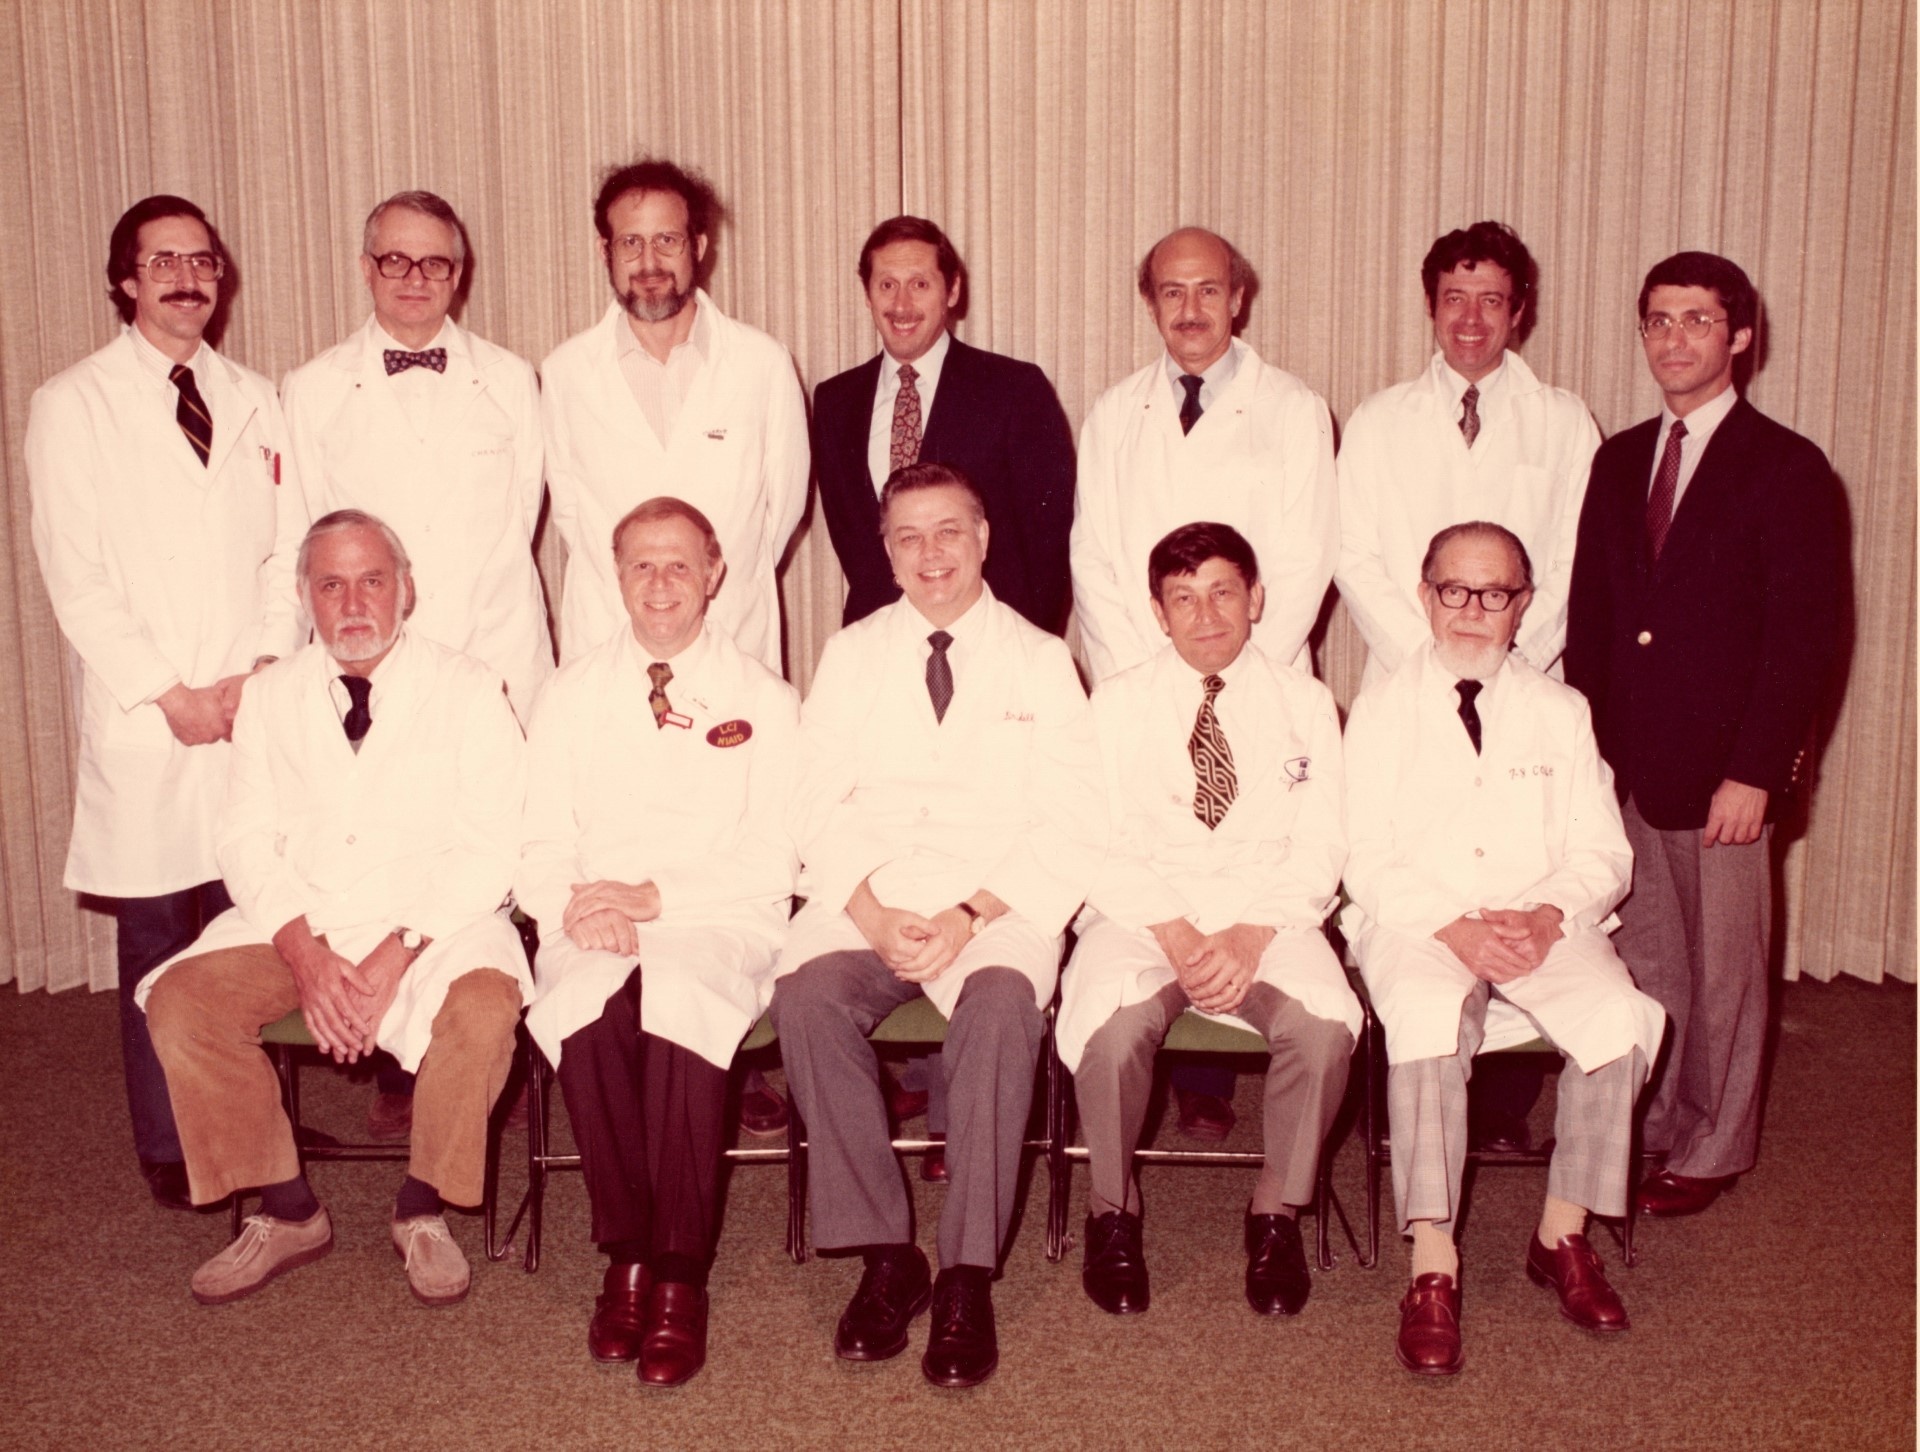 1979 NIAID Lab Chiefs in two rows, all white men, some in white coats